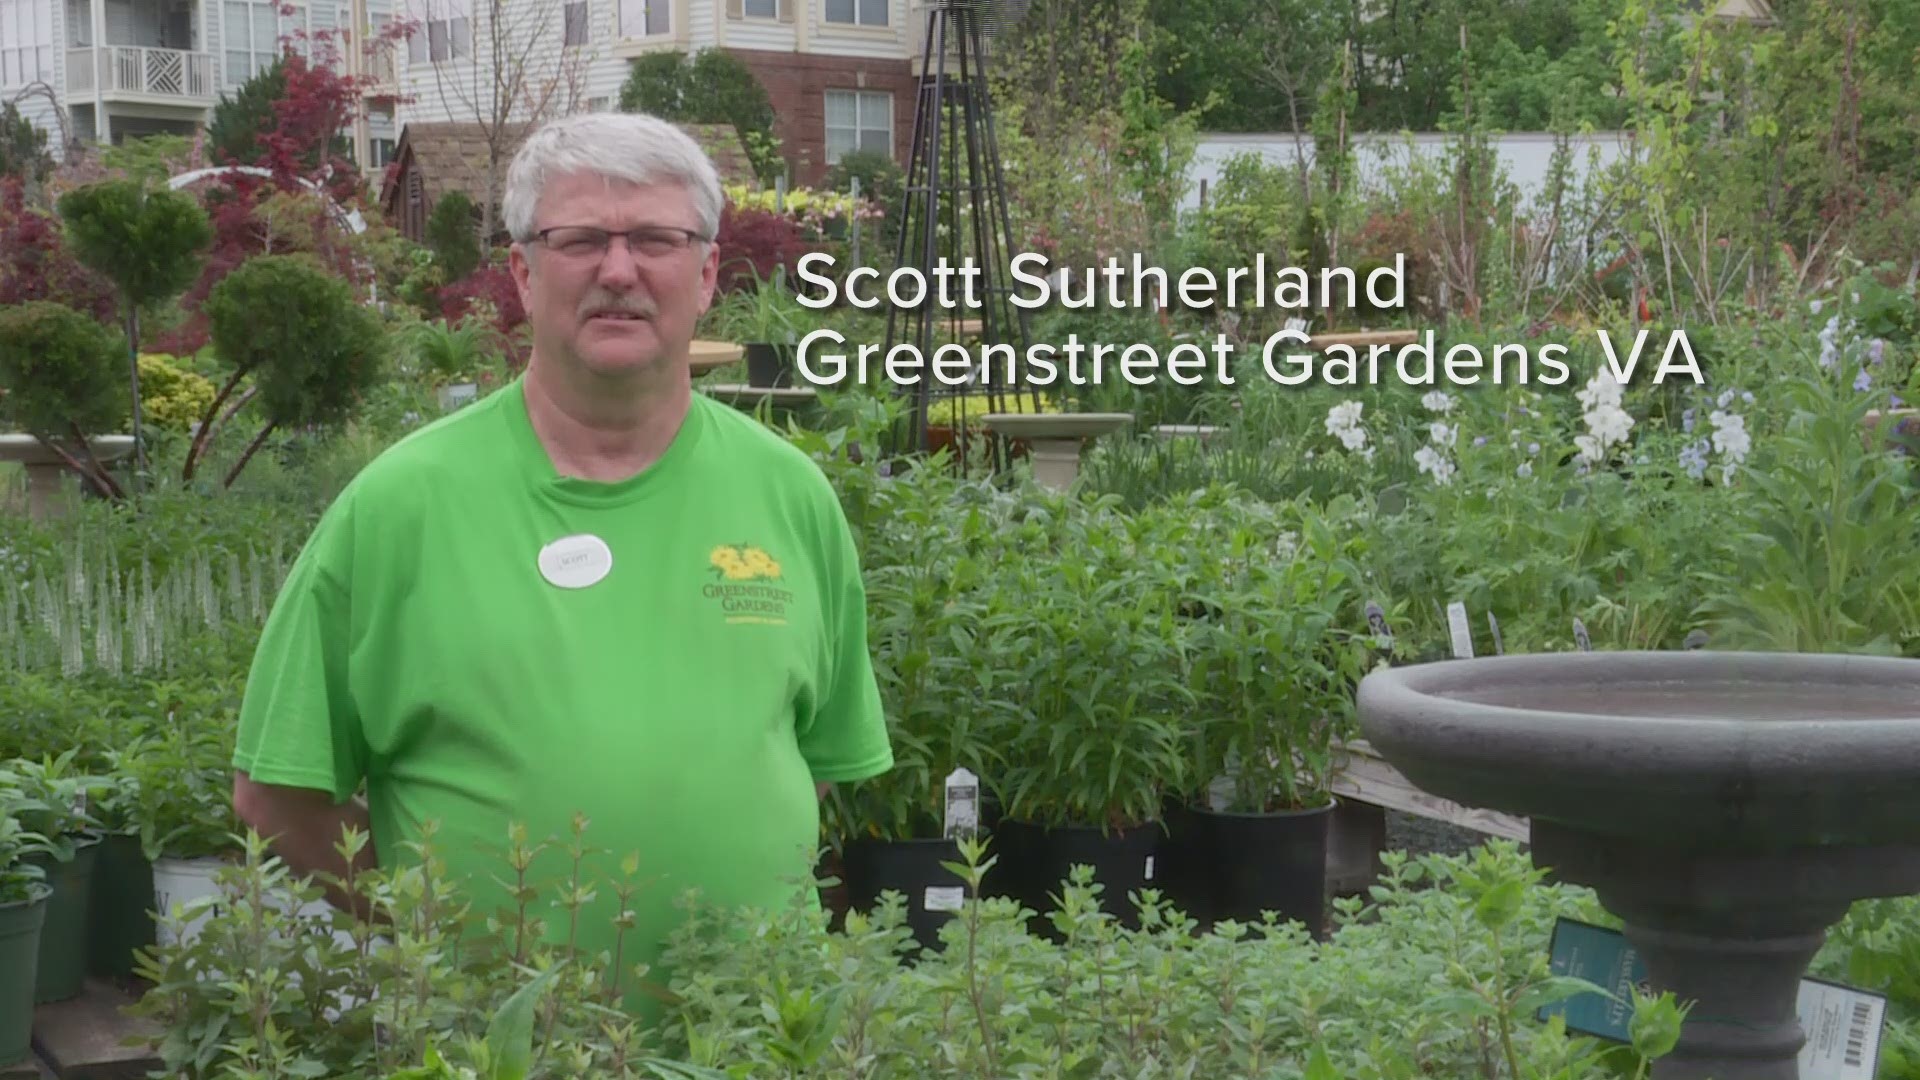 Scott Sutherland, a marketing specialist with Greenstreet Gardens, explains the impact of groundwater on gardening.